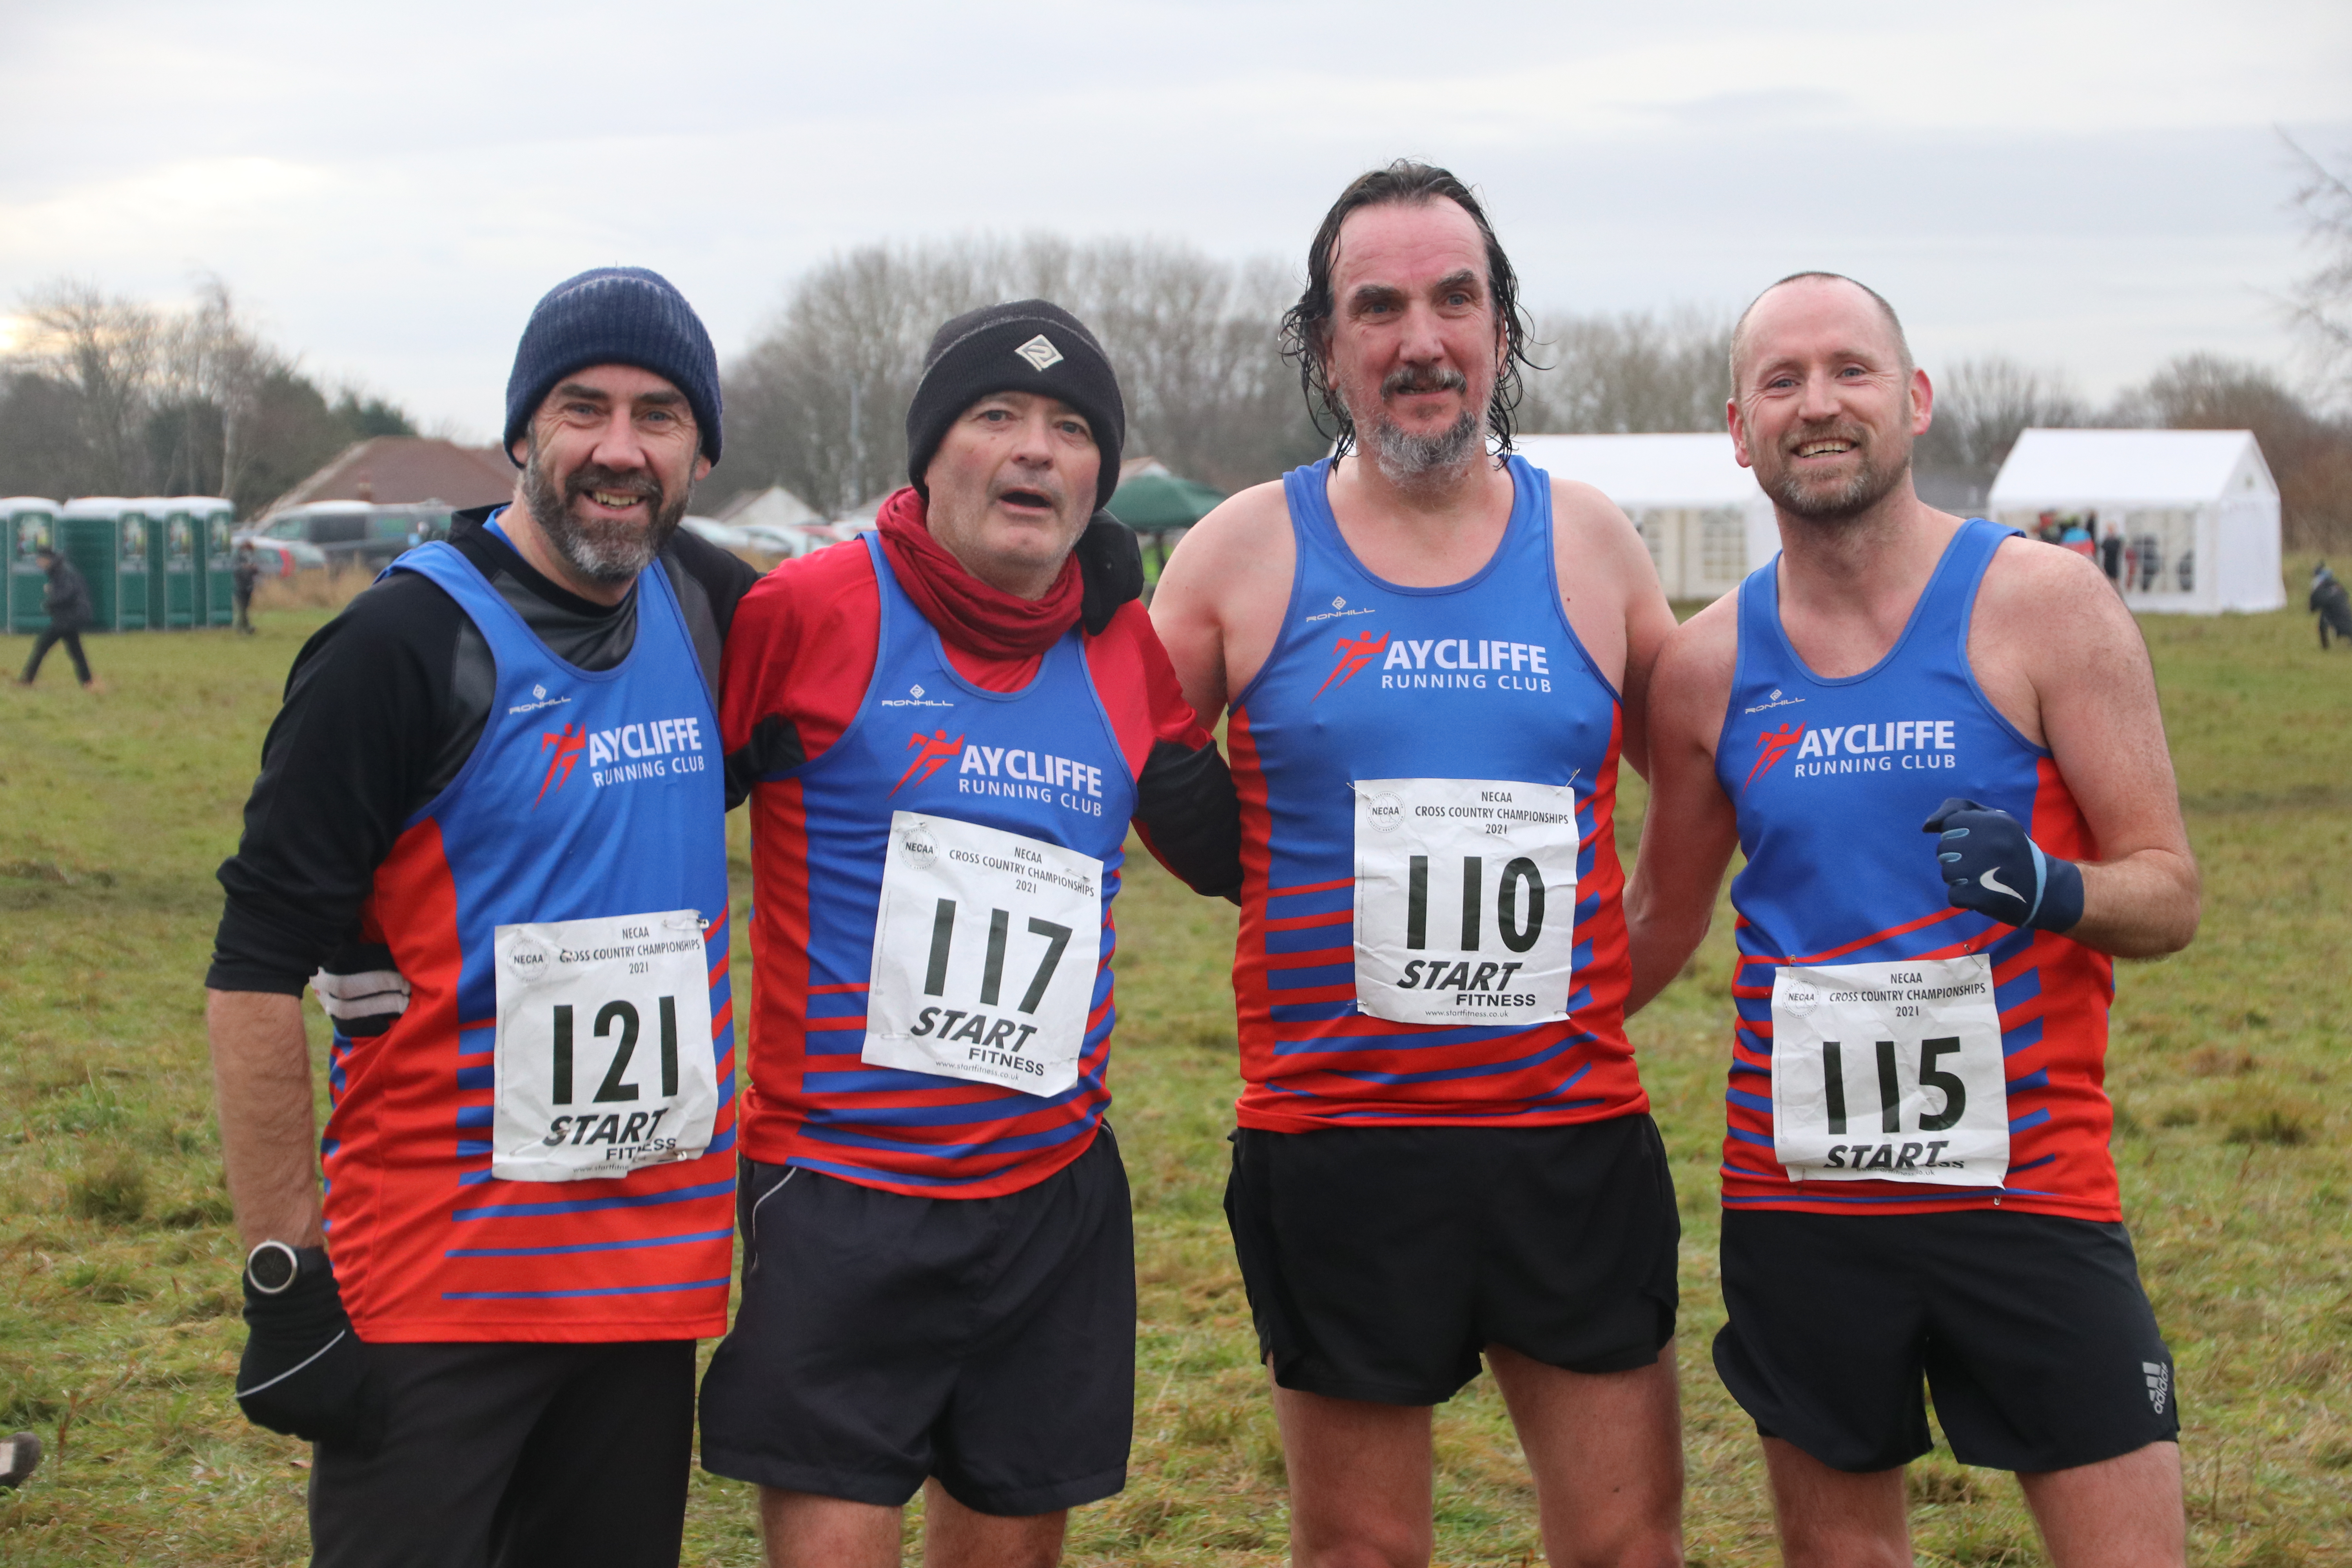 Some of the Men's Team at the NECCA XC Champs